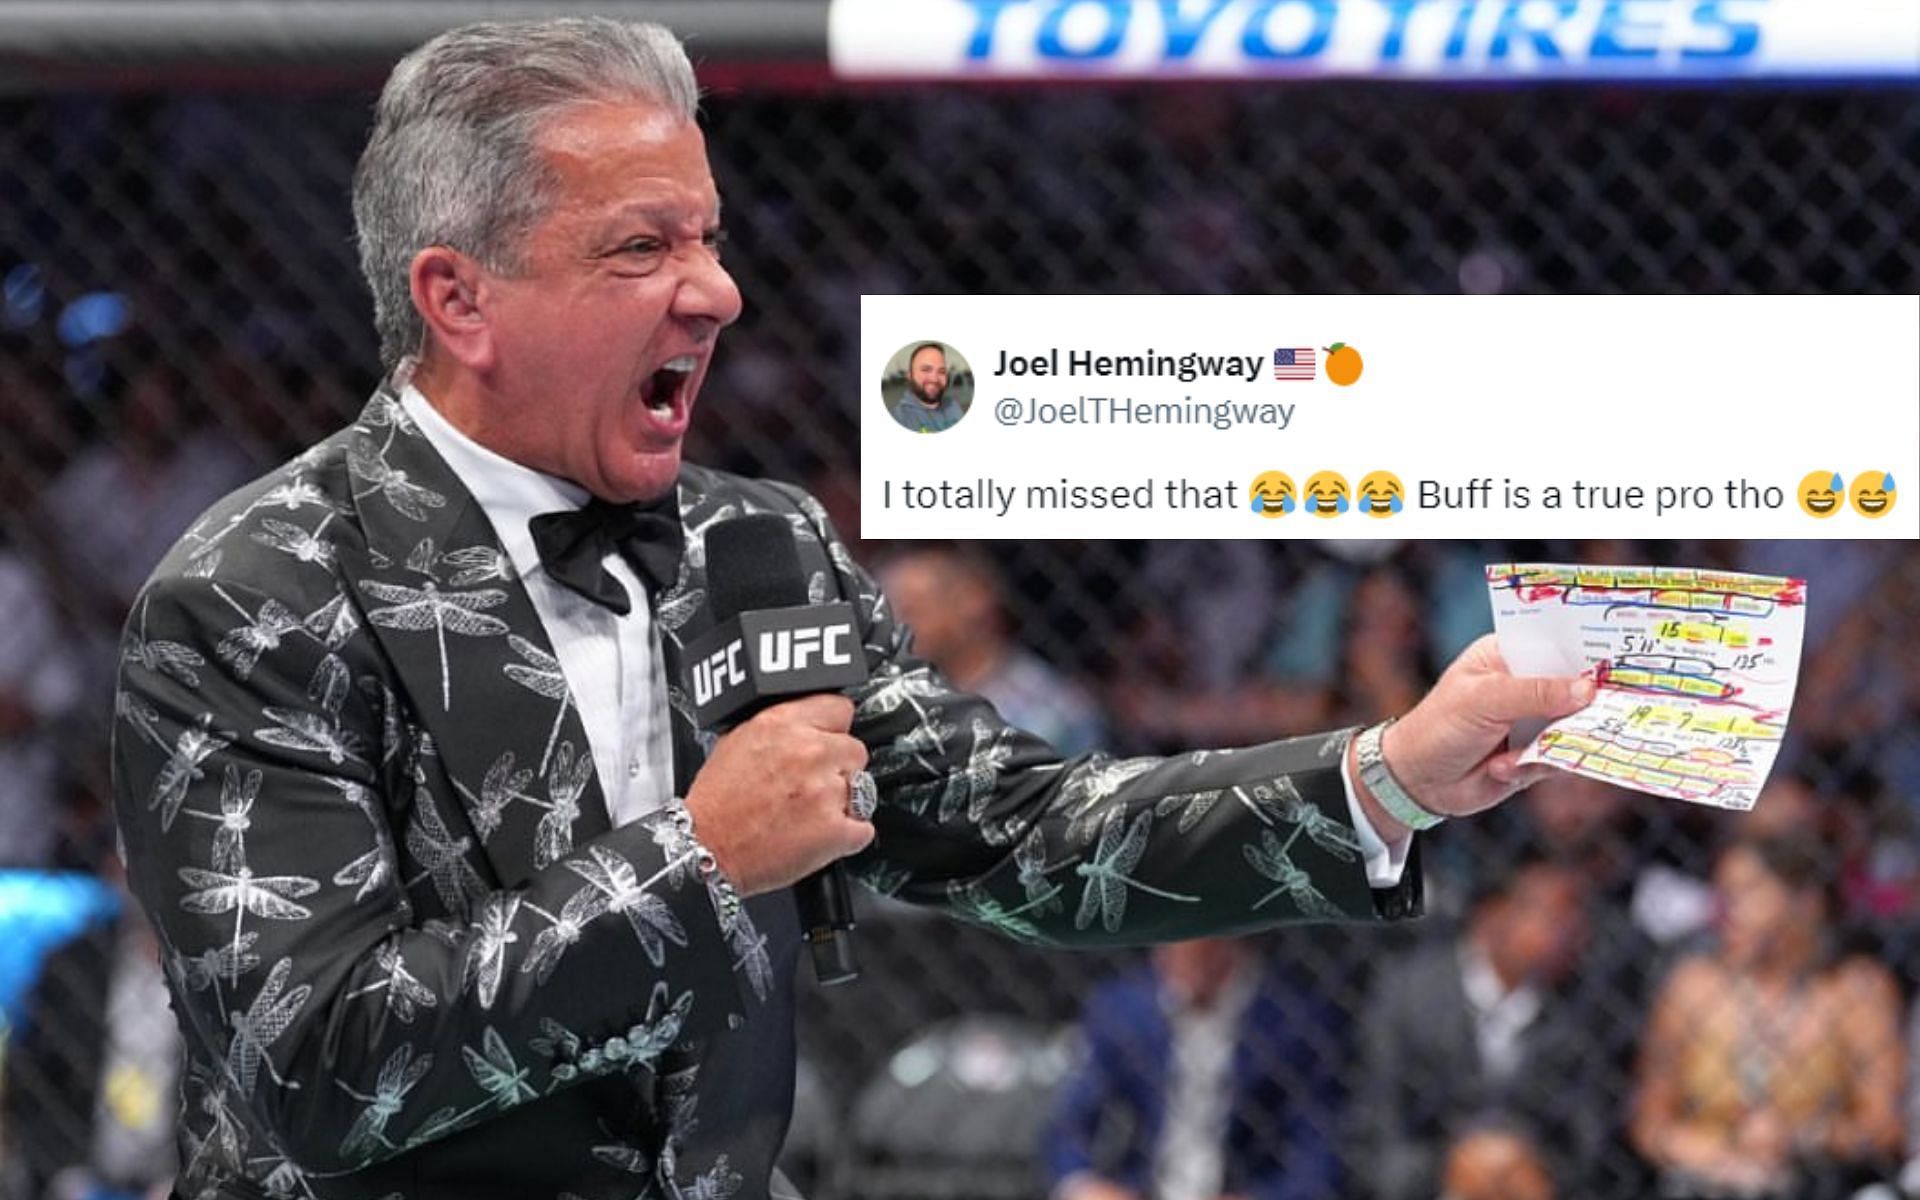 Bruce Buffer is considered to be one of the greatest combat sports announcers of all time [Image courtesy: @brucebufferufc on Instagram]